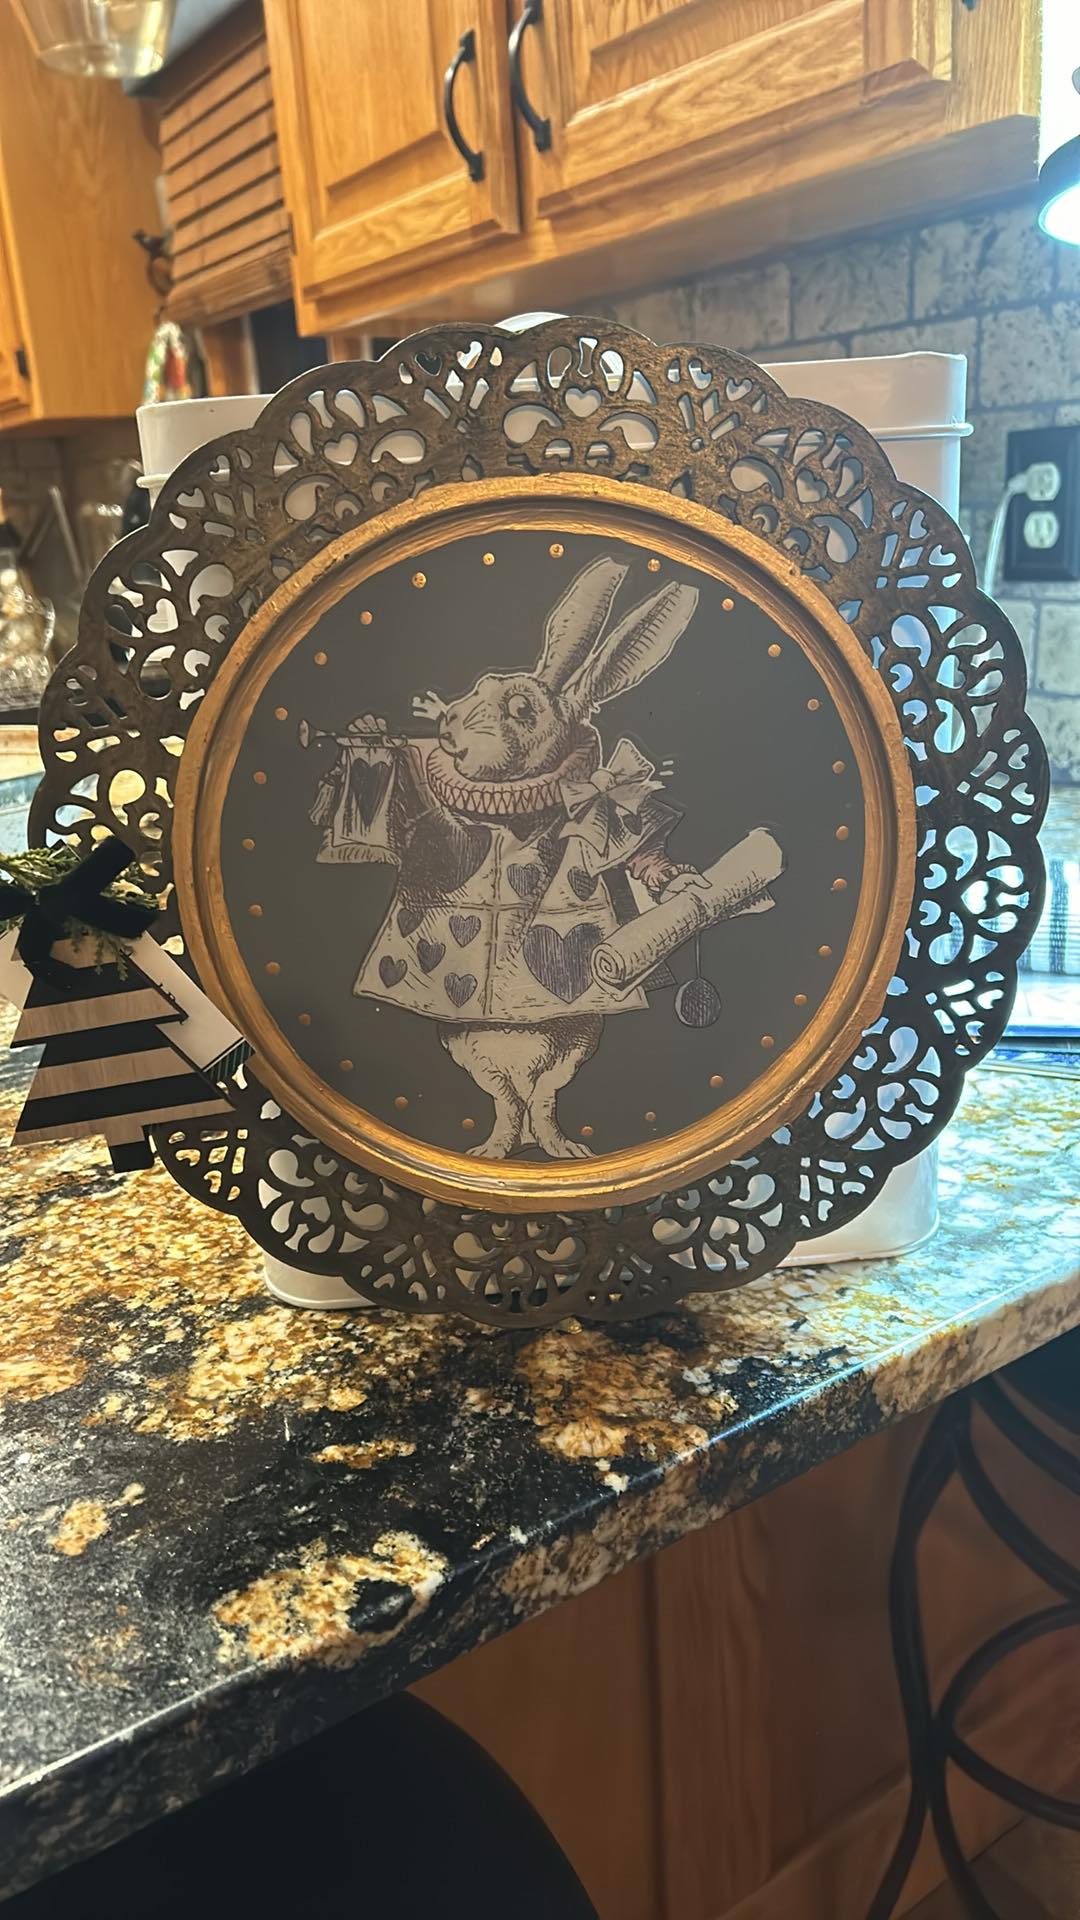 Platter with rabbit from Alice in wonderland